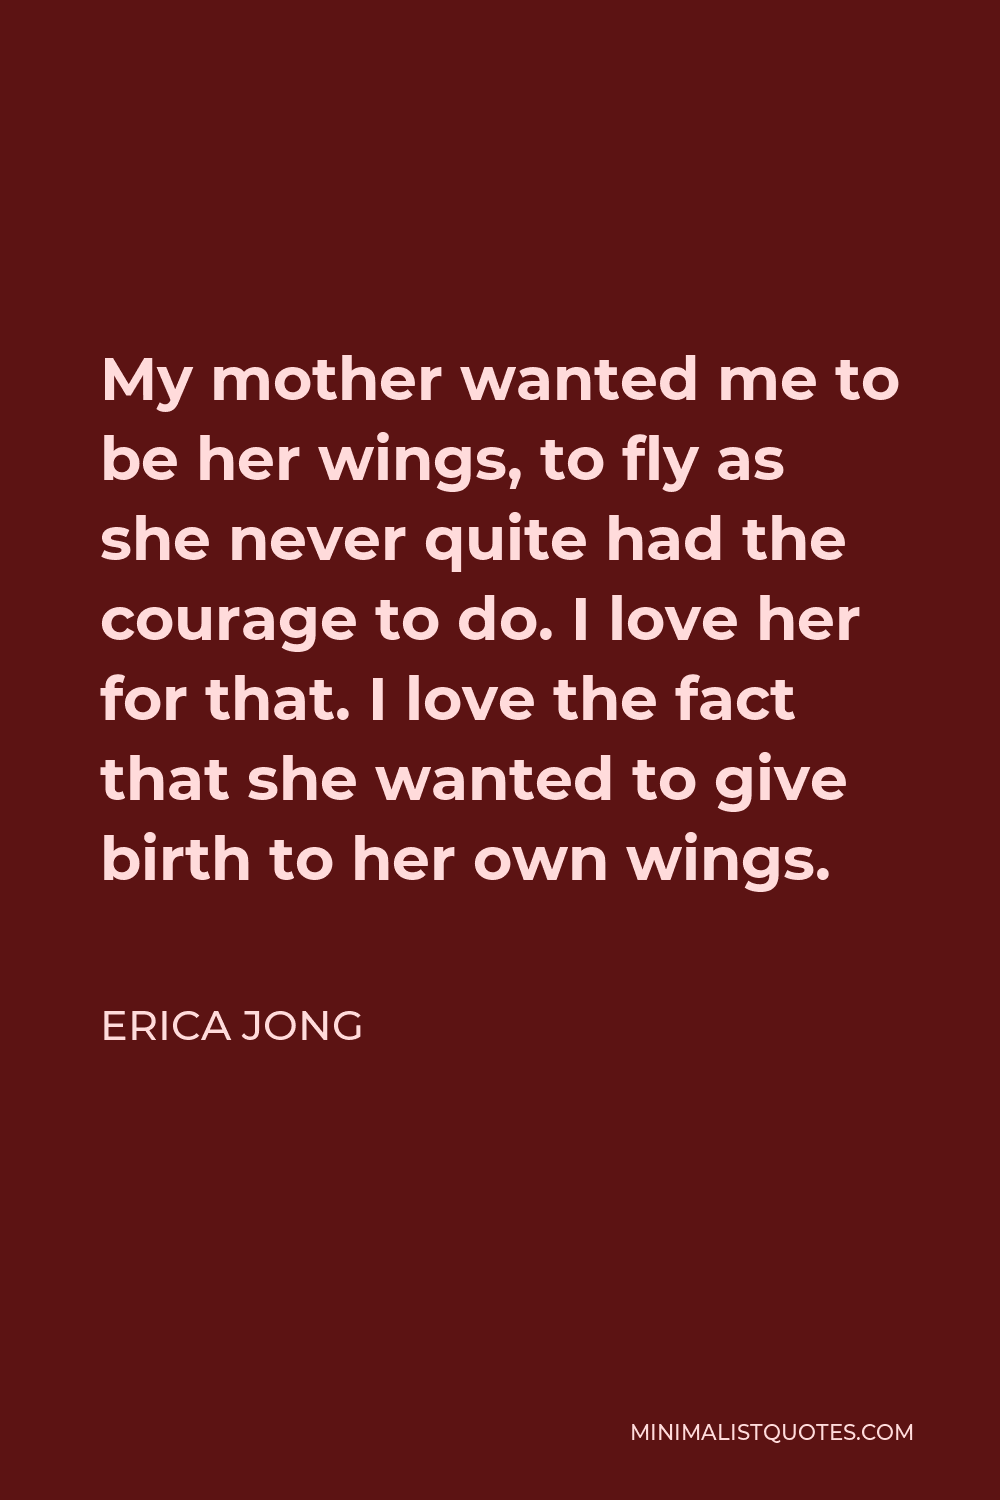 Erica Jong Quote - My mother wanted me to be her wings, to fly as she never quite had the courage to do. I love her for that. I love the fact that she wanted to give birth to her own wings.